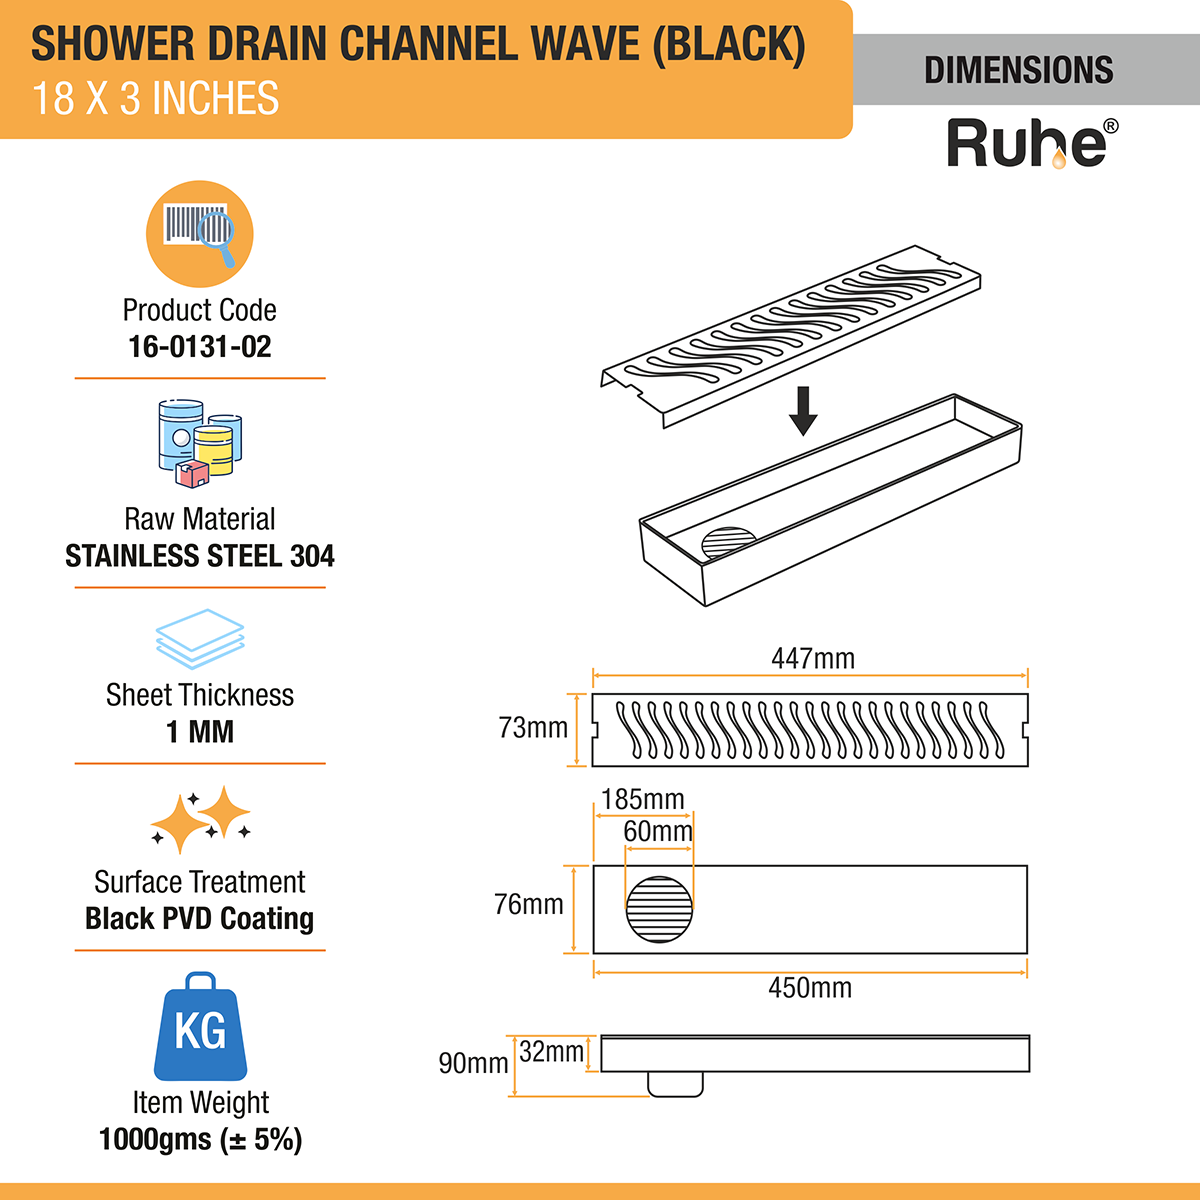 Wave Shower Drain Channel (18 x 3 Inches) Black PVD Coated dimensions and sizes